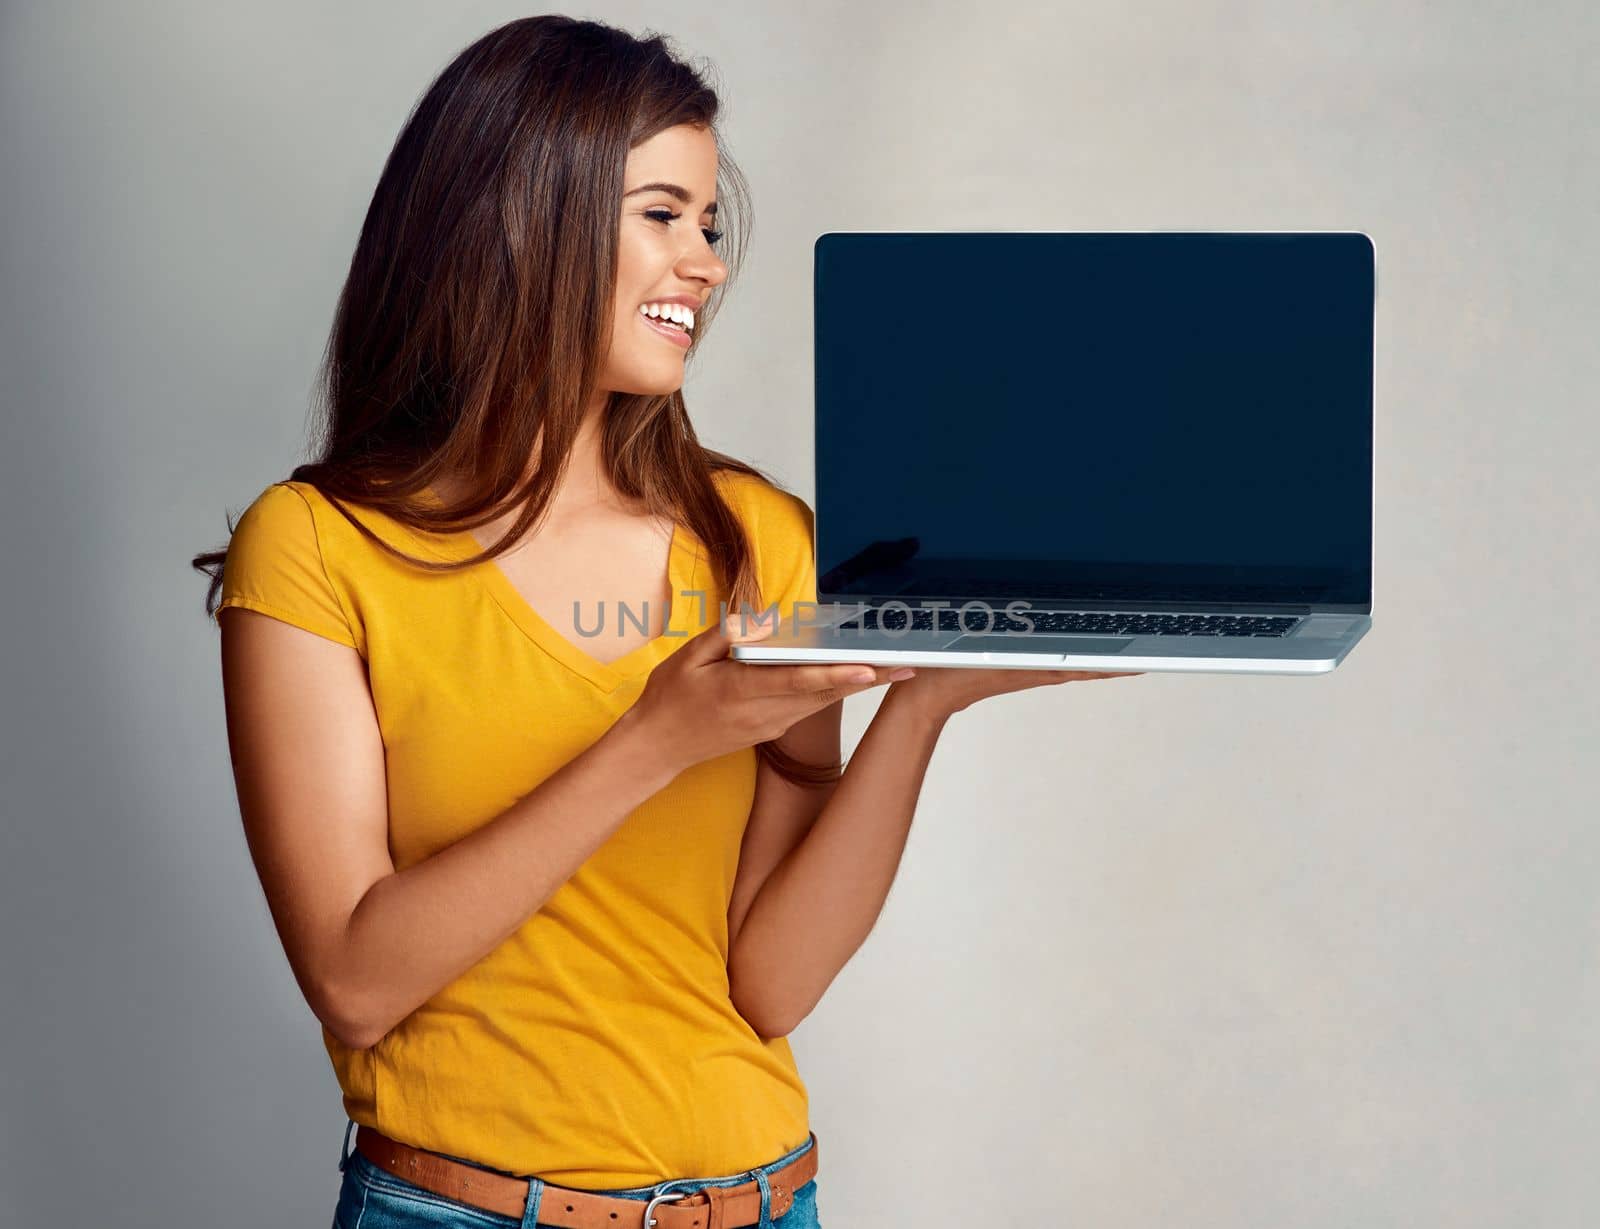 Be a part of something bigger online. Studio shot of an attractive young woman holding to a laptop with a blank screen against a grey background. by YuriArcurs